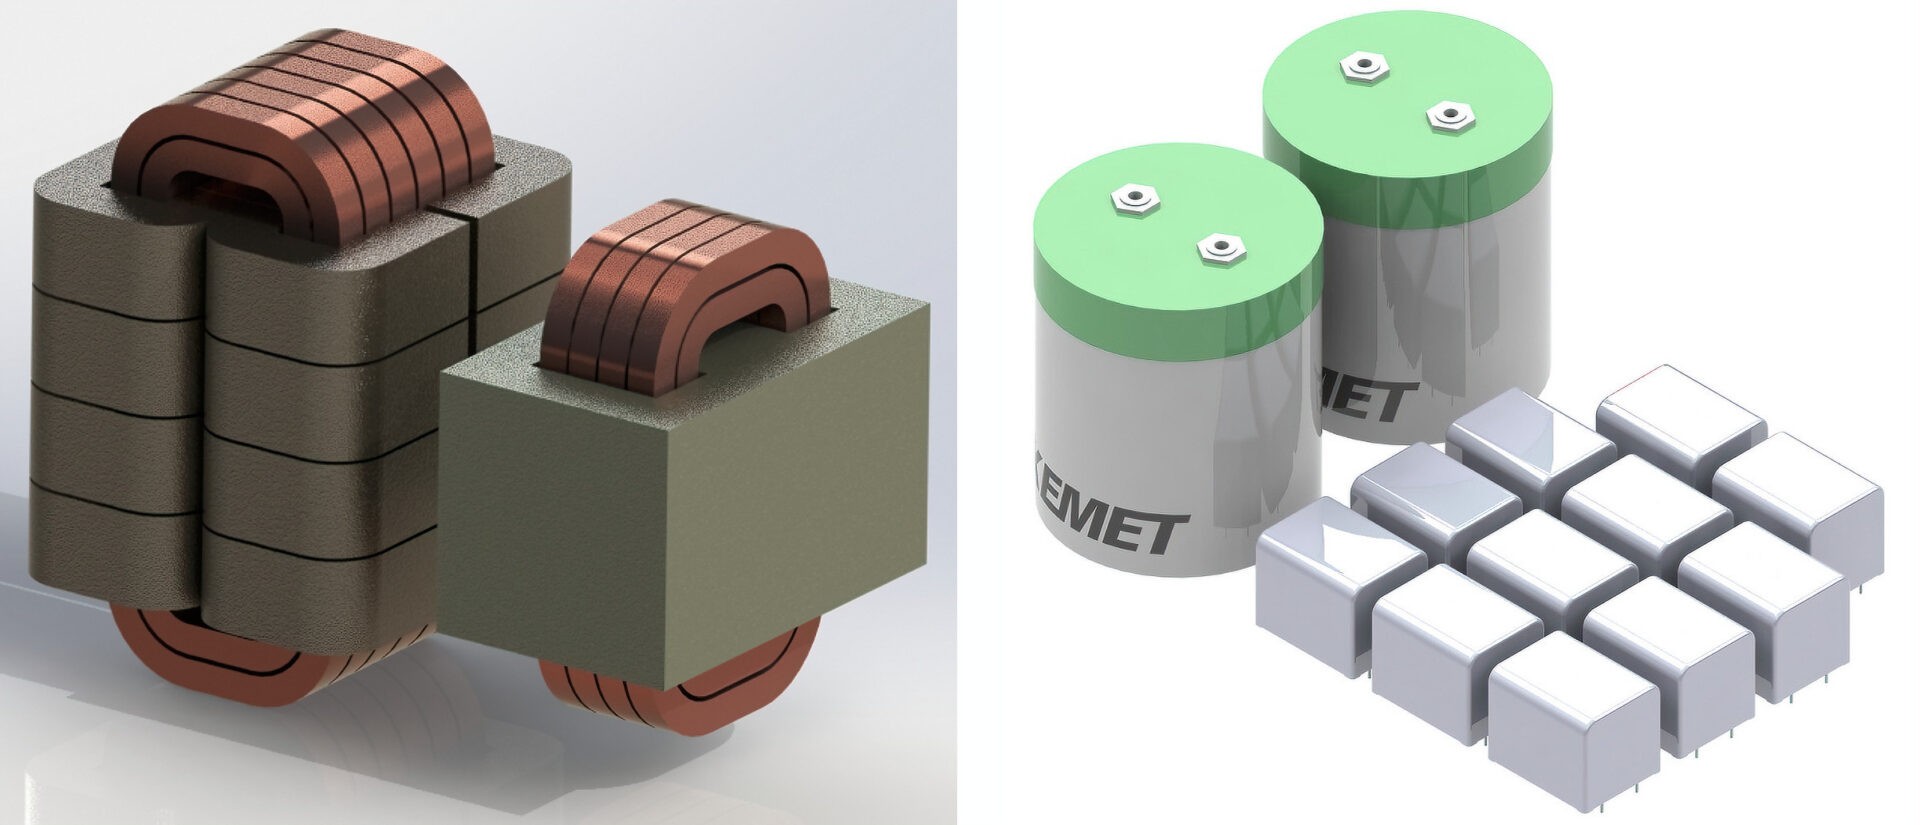 3D Modeled images of SiC based Active Front Ends. These products are smaller than an IGBT based design.